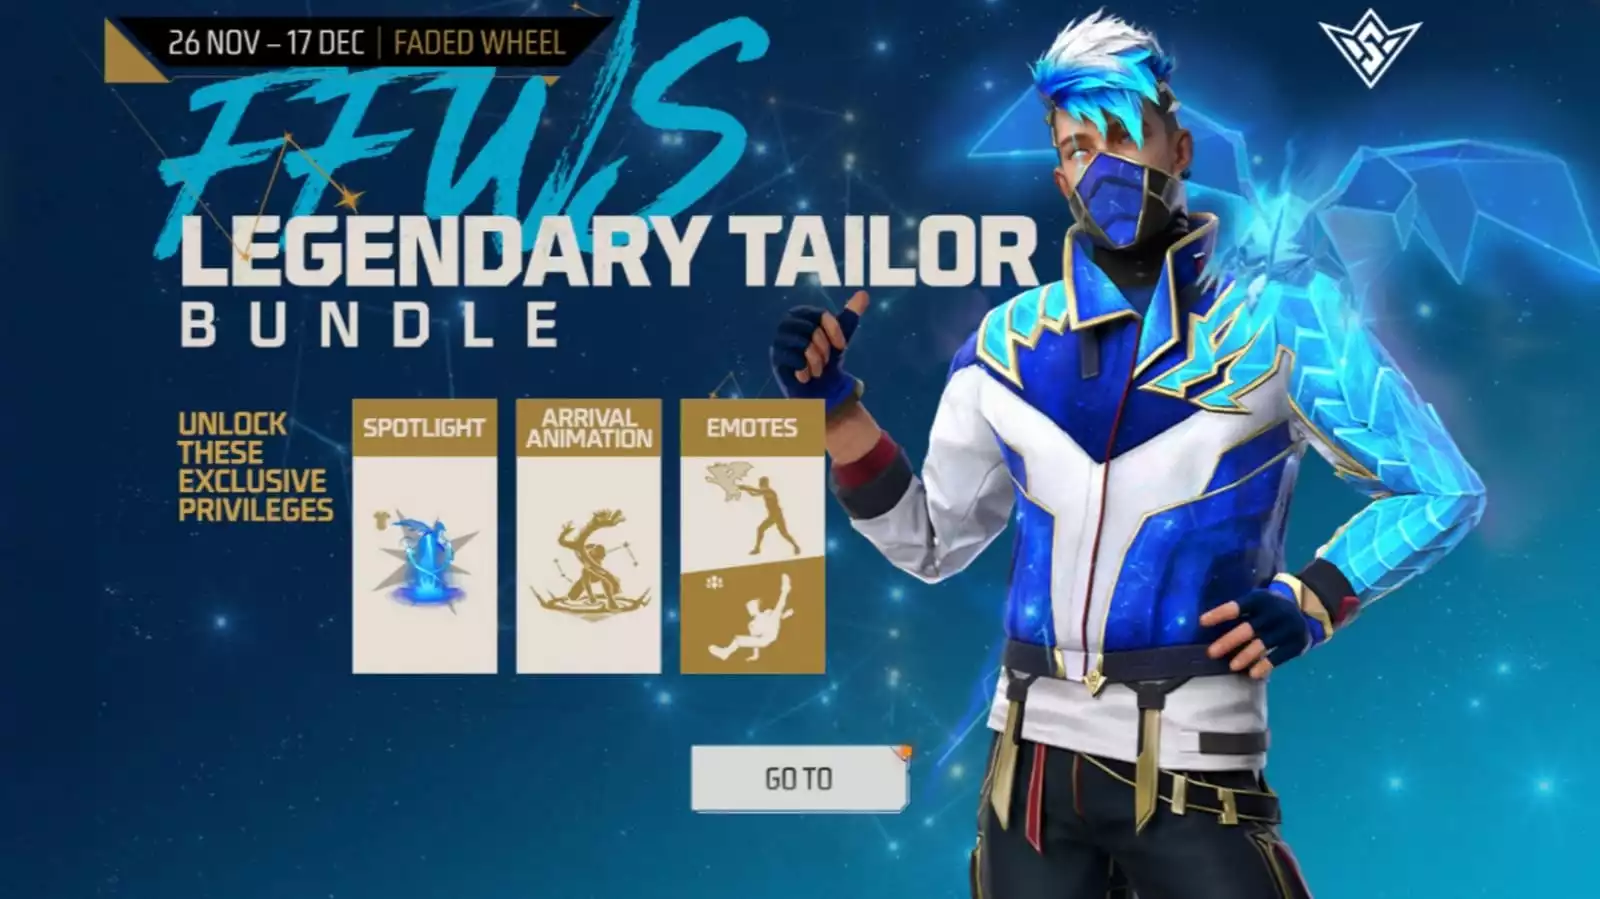 How To Get FFWS Legendary Tailor Bundle In Free Fire Max 2022